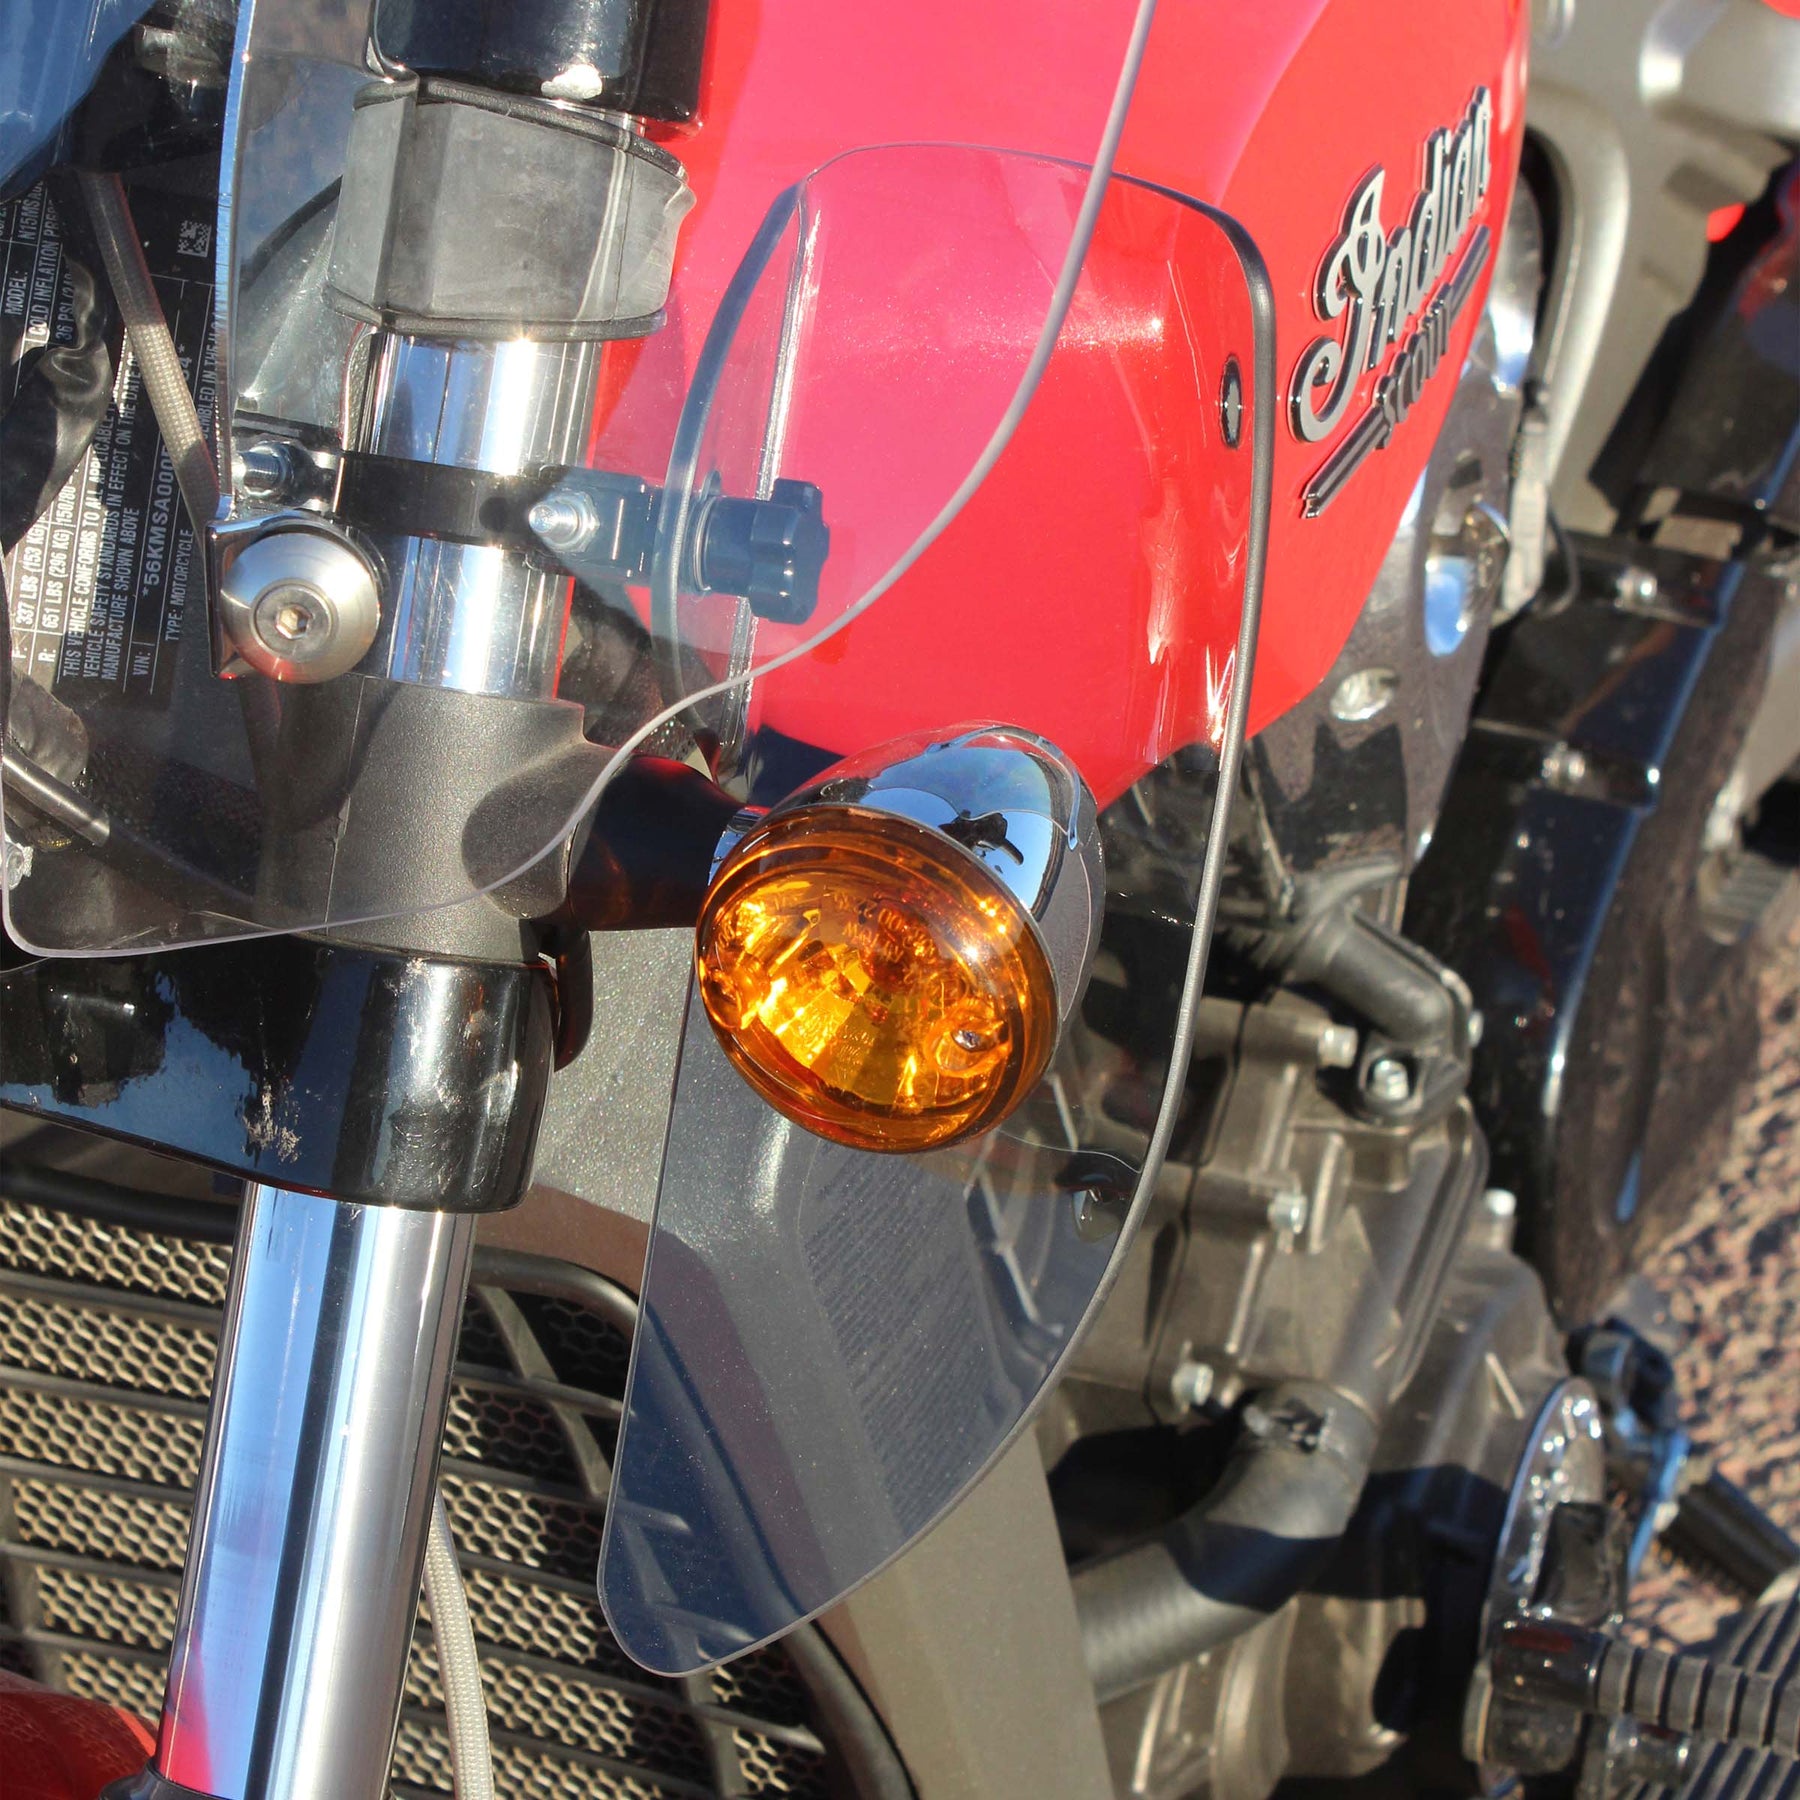 Tint Flare™ Wings For Indian® Scout Motorcycles